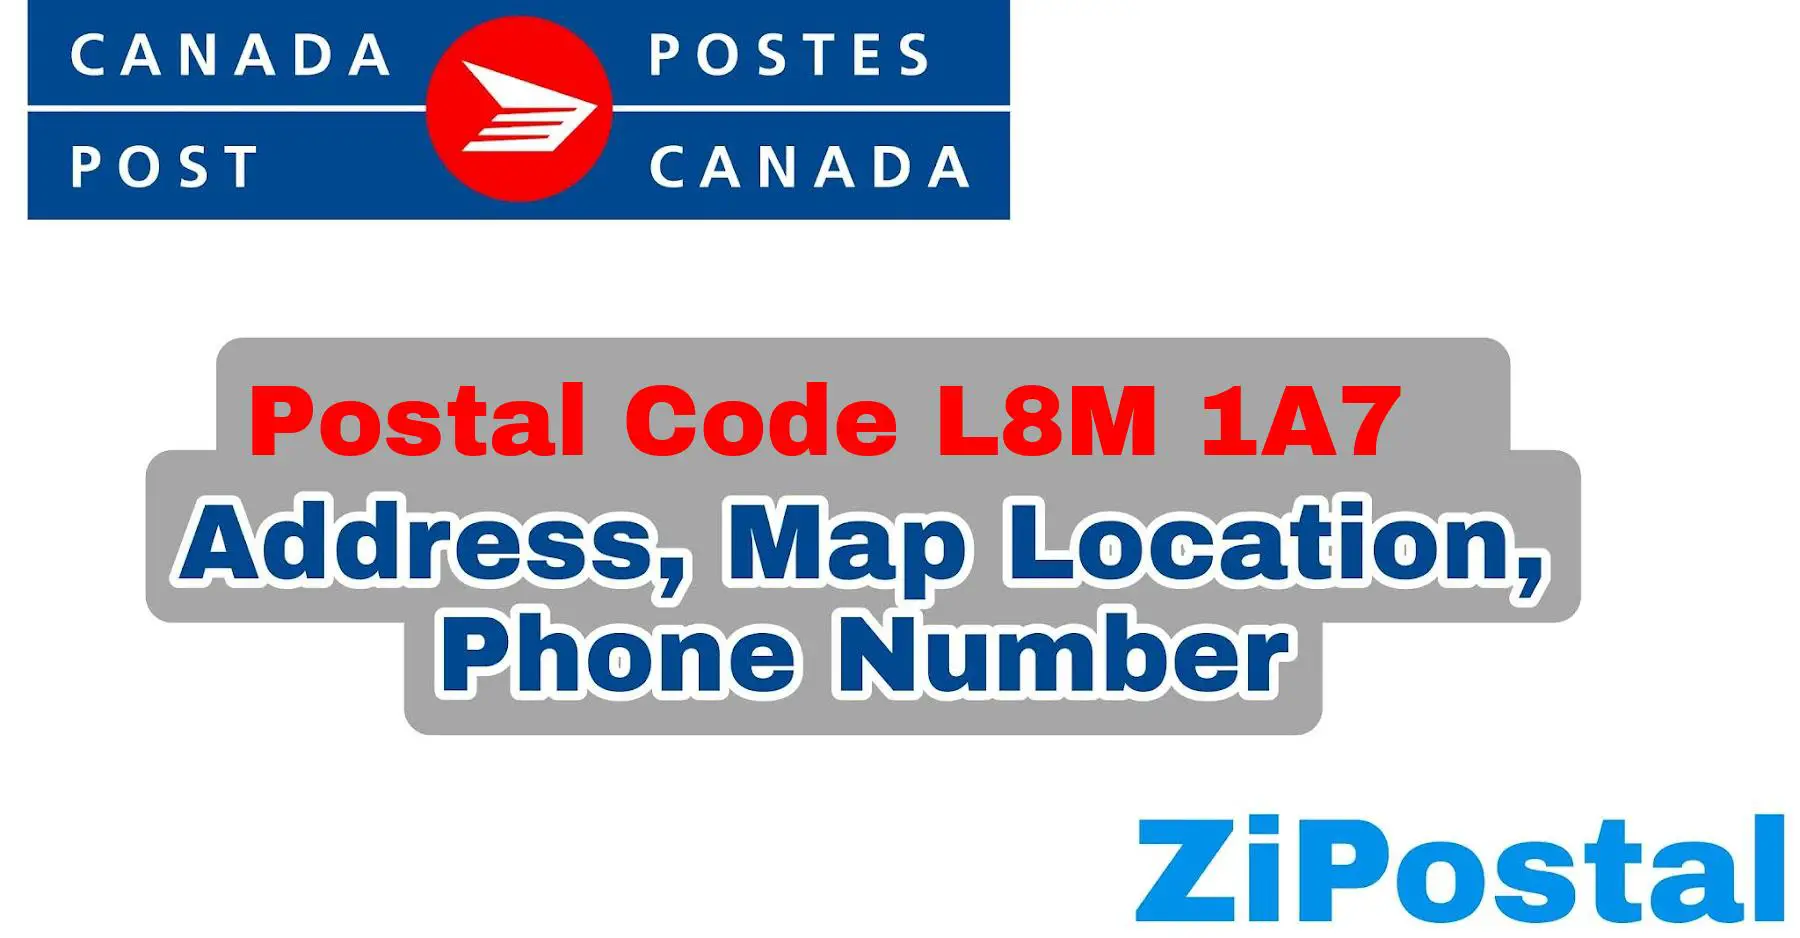 Postal Code L8M 1A7 Address Map Location and Phone Number